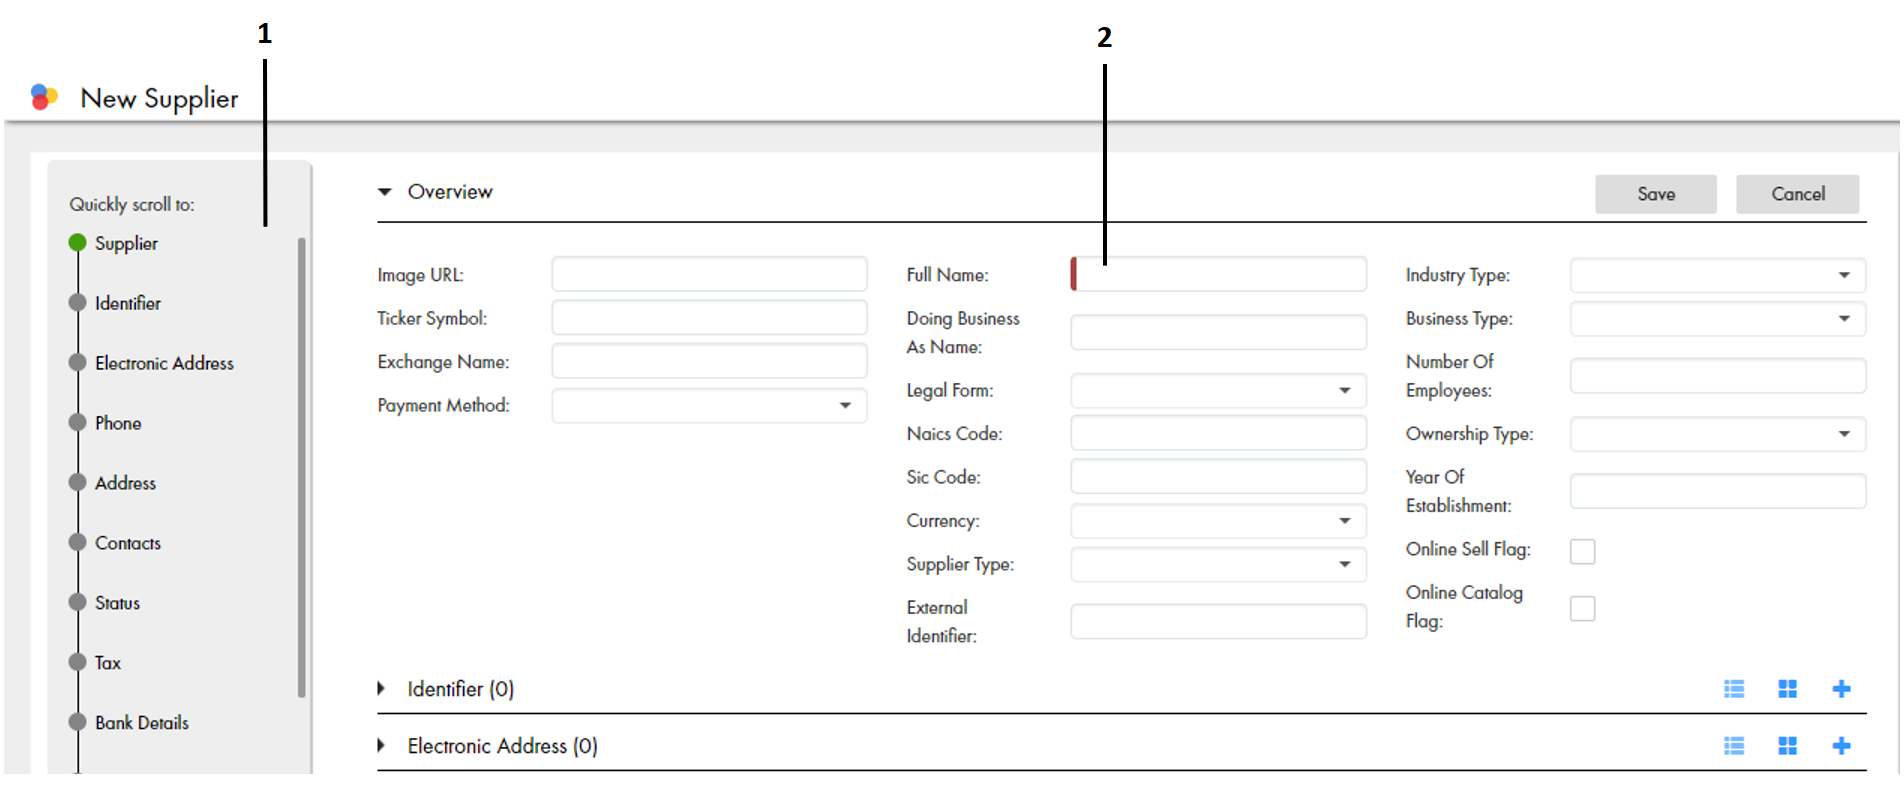 The data entry form contains the Navigation menu on left, and data the fields on the right. The required fields are marked with a red line. 
				